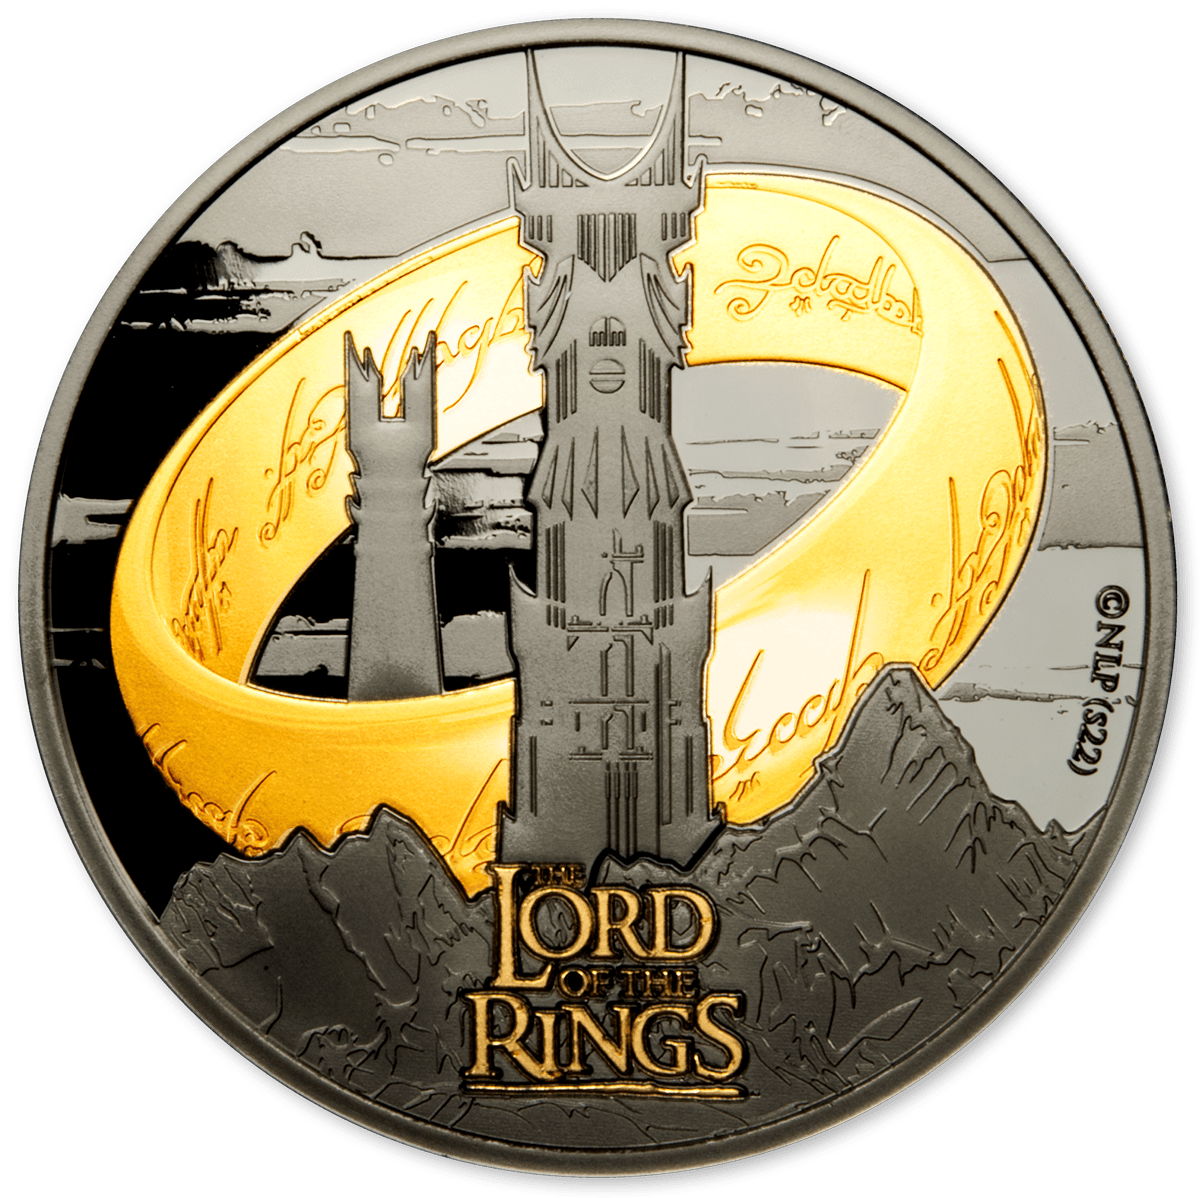 LORD OF THE RINGS 24k Gold Plating 1 Oz Silver Coin $5 Samoa 2022 - PARTHAVA COIN